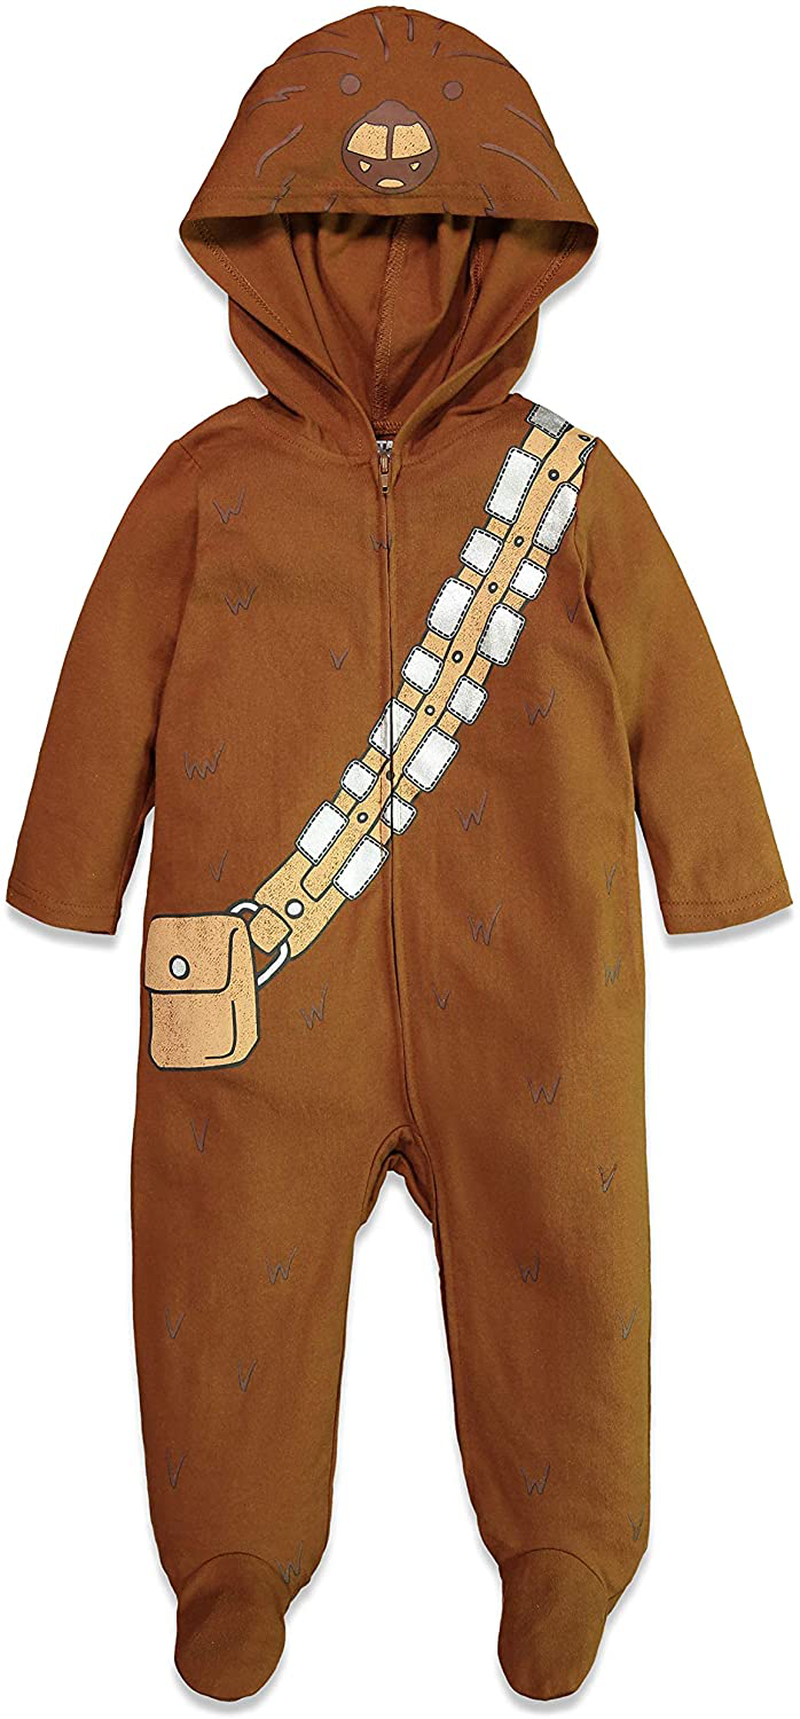 STAR WARS Baby Boys Costume Zip-Up Footies with Hood Apparel & Accessories > Costumes & Accessories > Costumes STAR WARS   